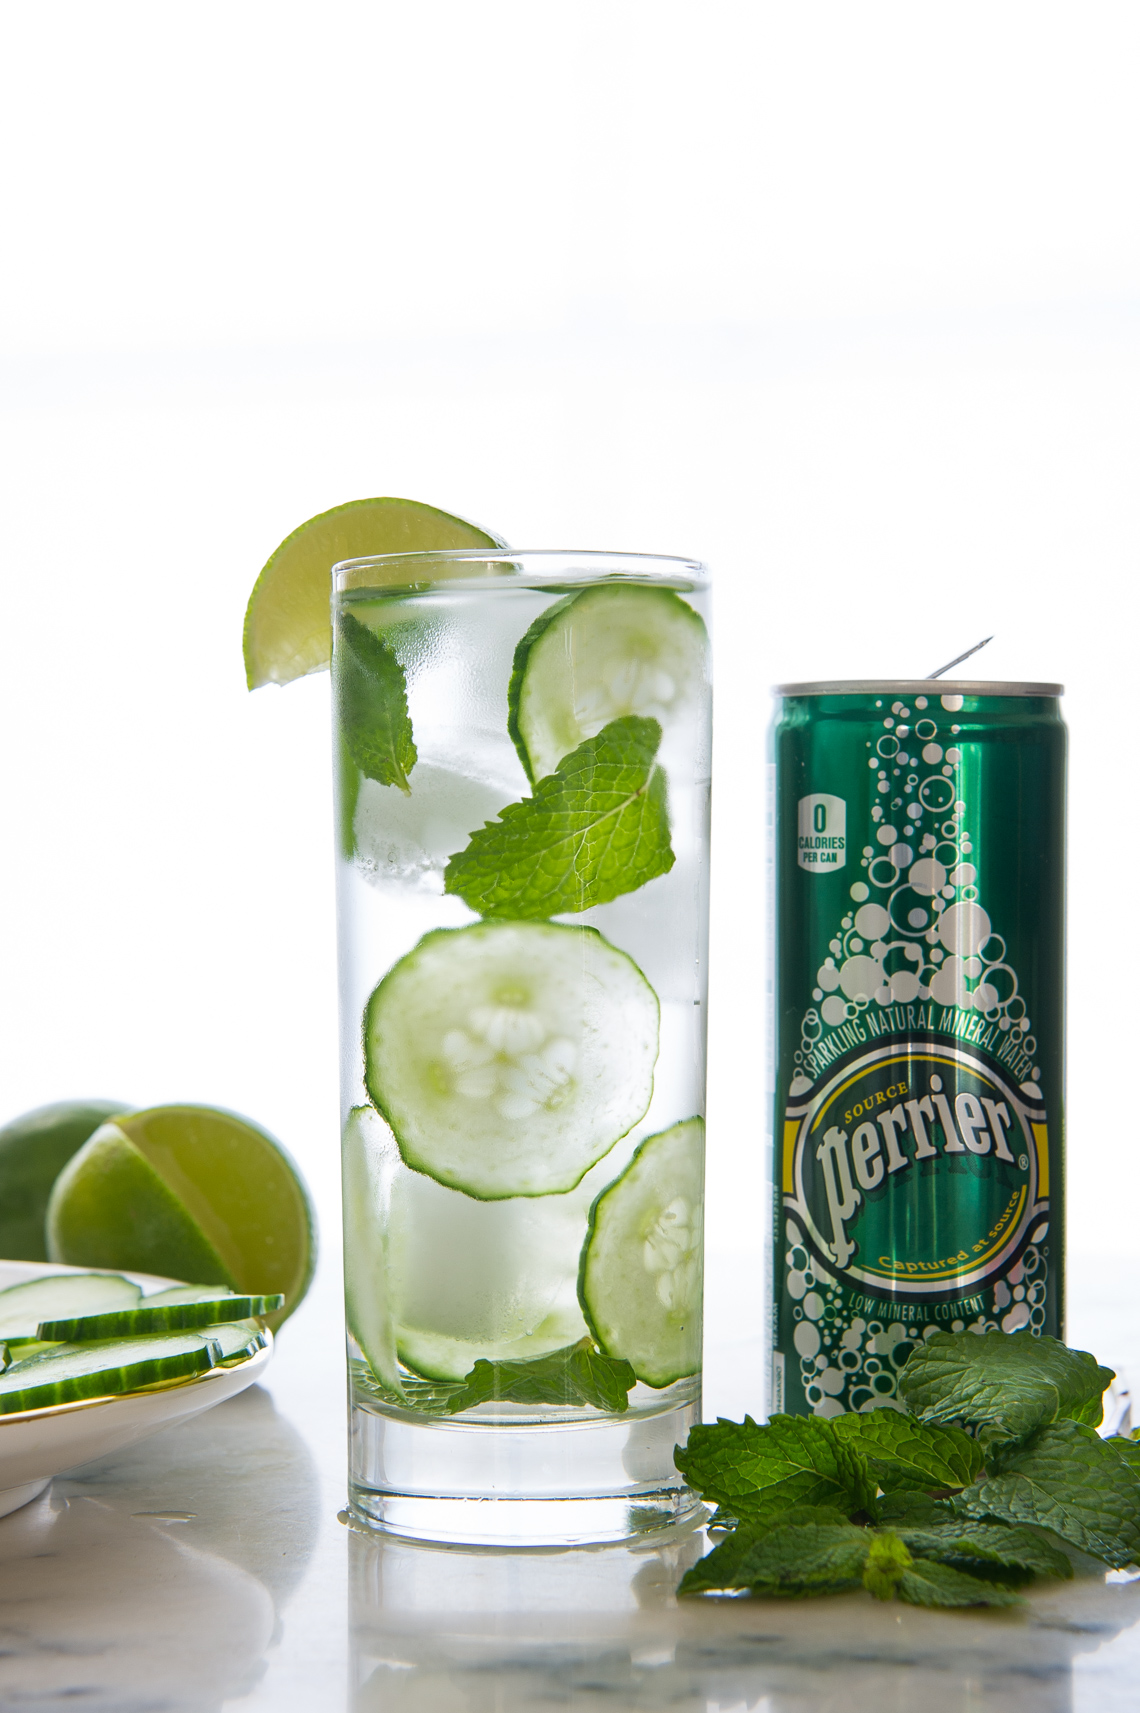 NYC Commercial Food Photographer - Perrier Cocktails